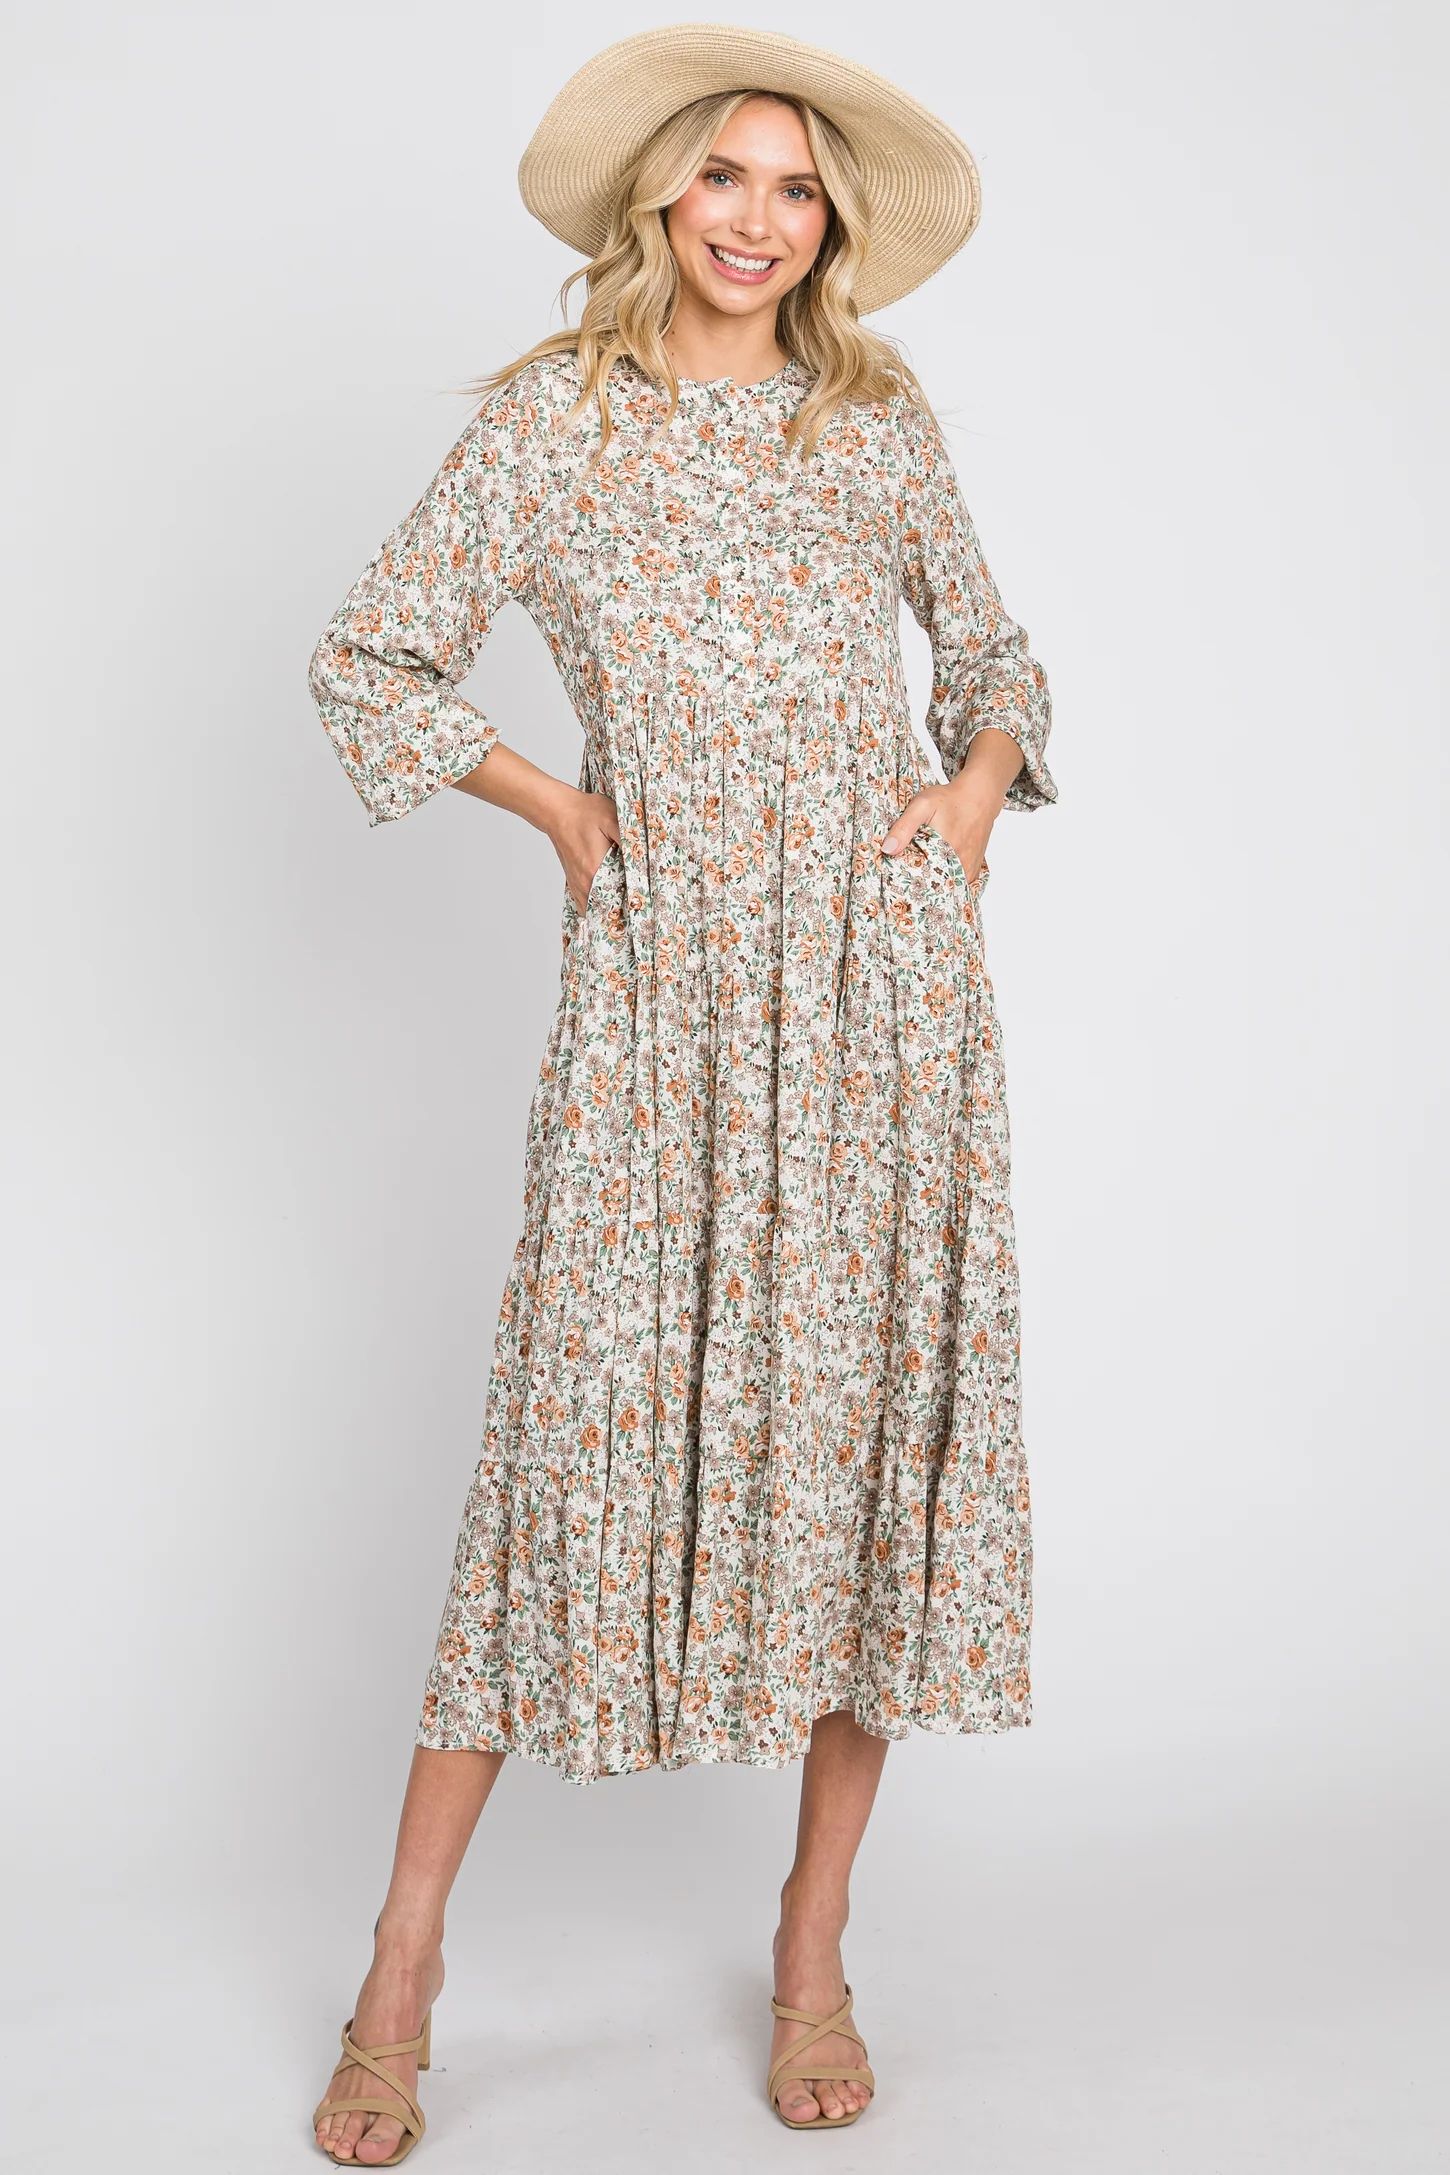 Beige Floral Button Front Long Sleeve Tiered Midi Dress | PinkBlush Maternity